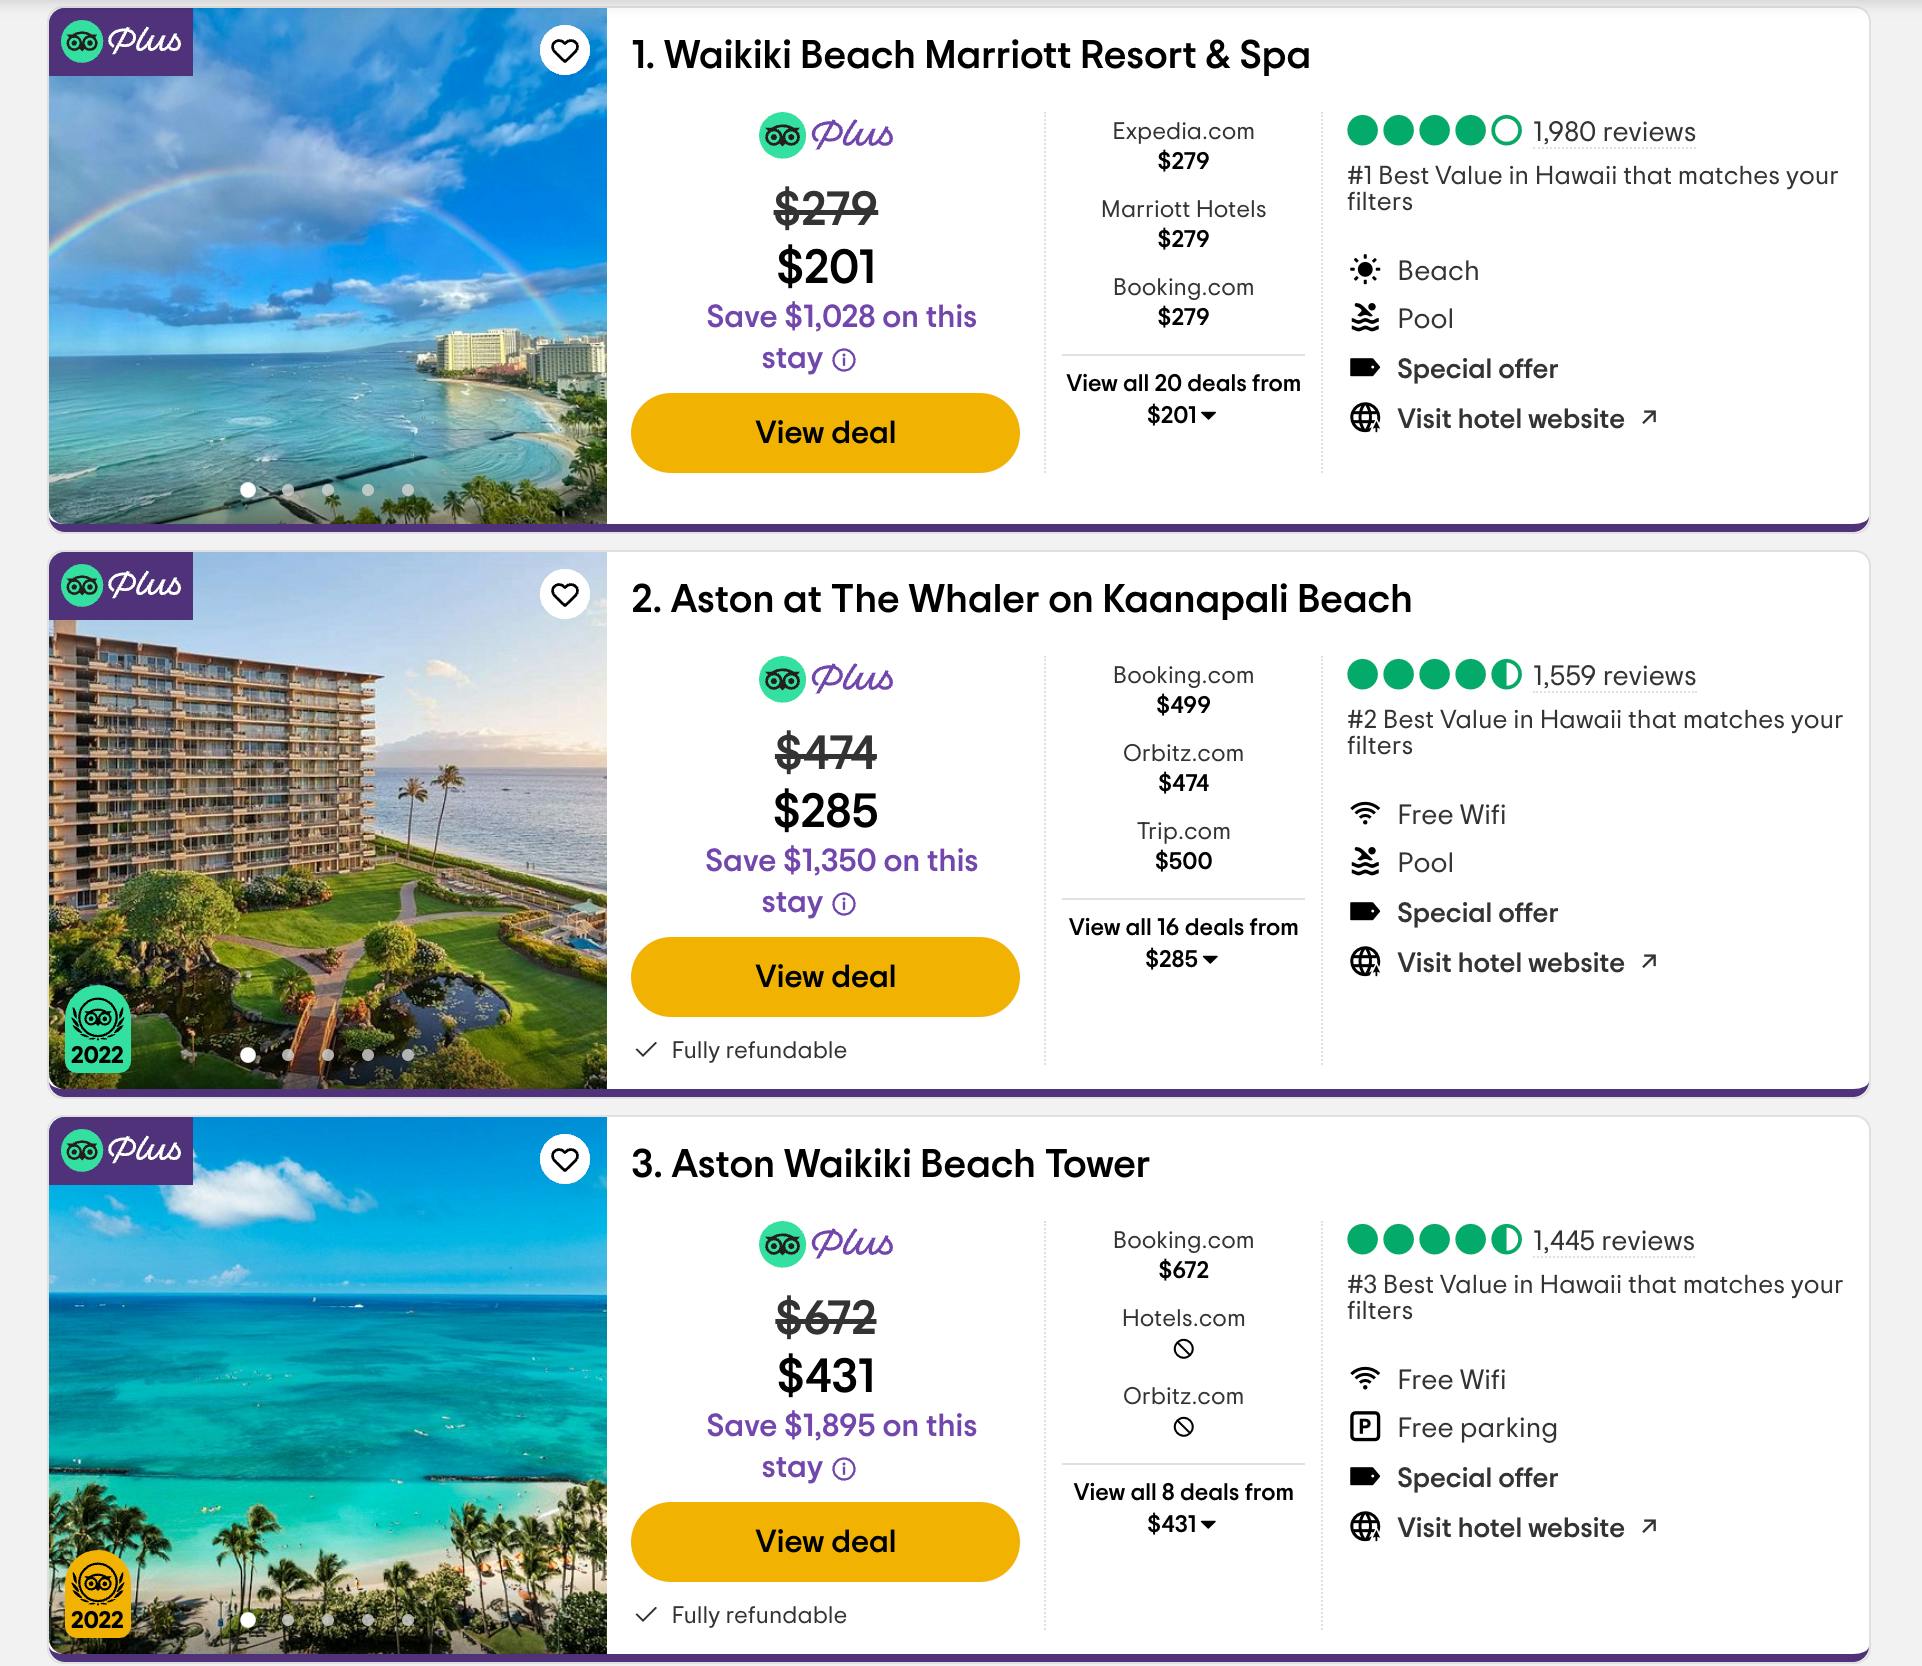 A screenshot of.a TripAdvisor search for hotels in Hawaii showing discounted rates with TripAdvisor Plus